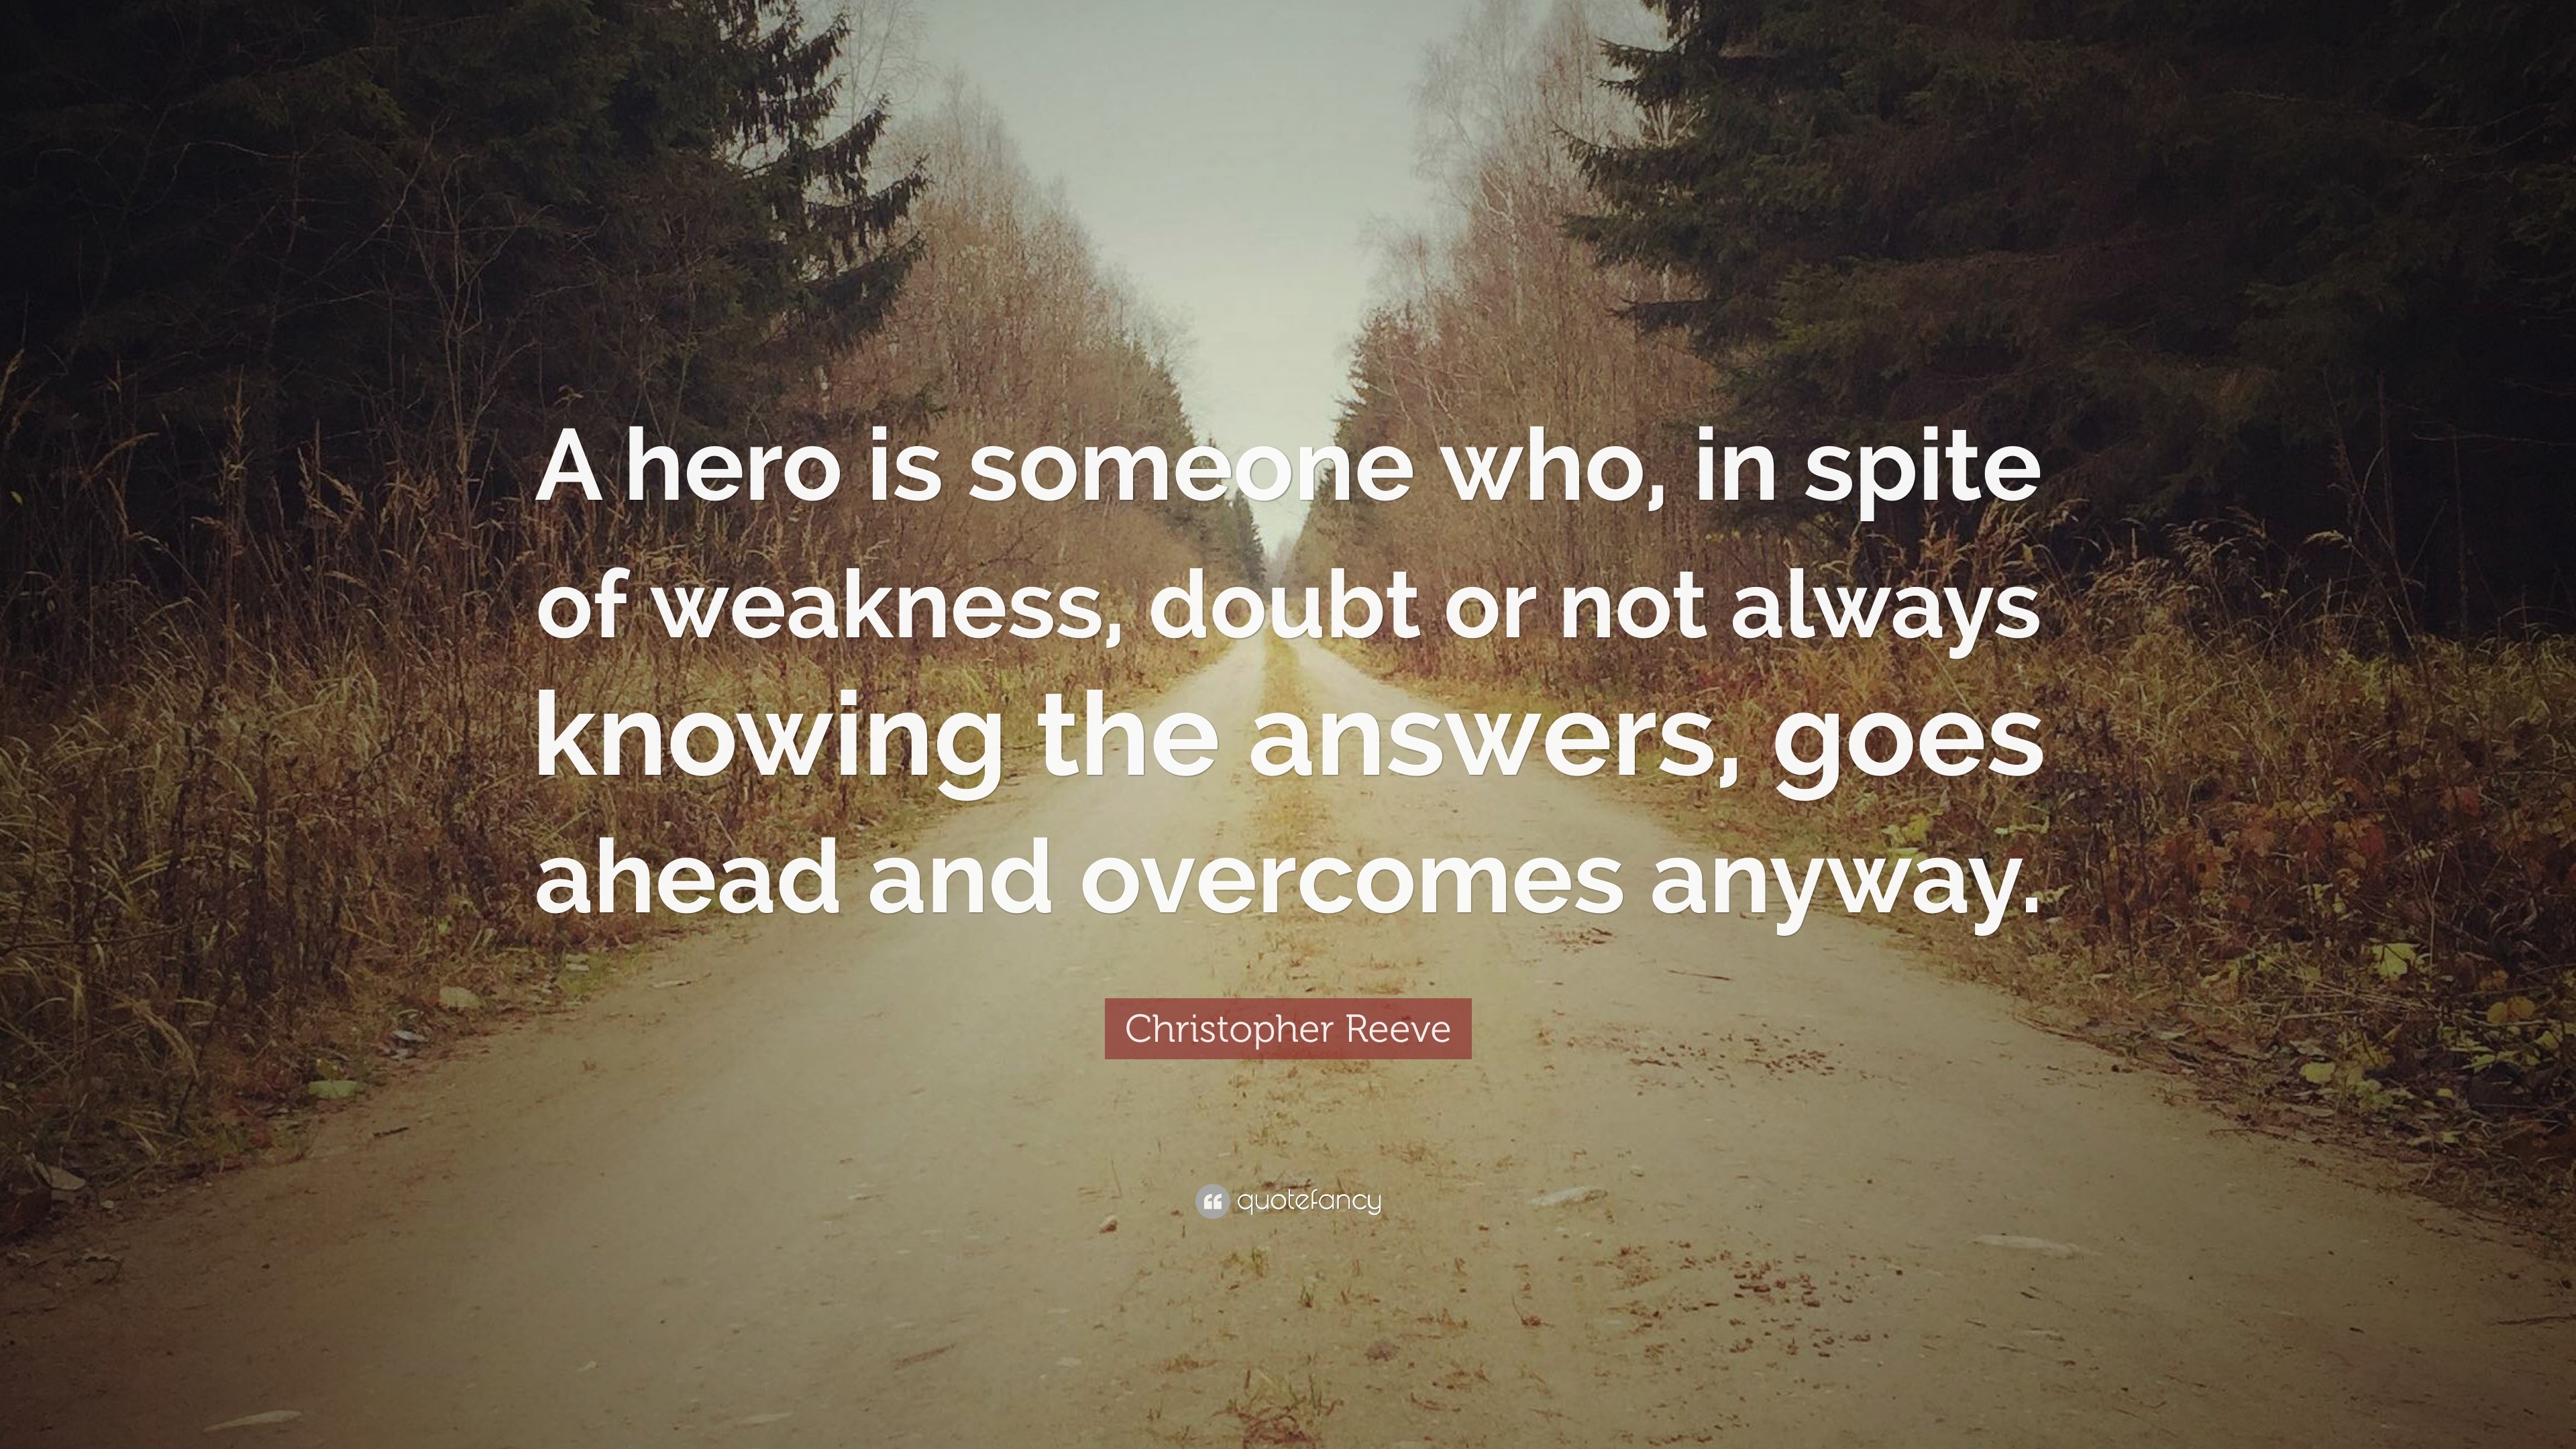 Christopher Reeve Quote: “A hero is someone who, in spite of weakness ...